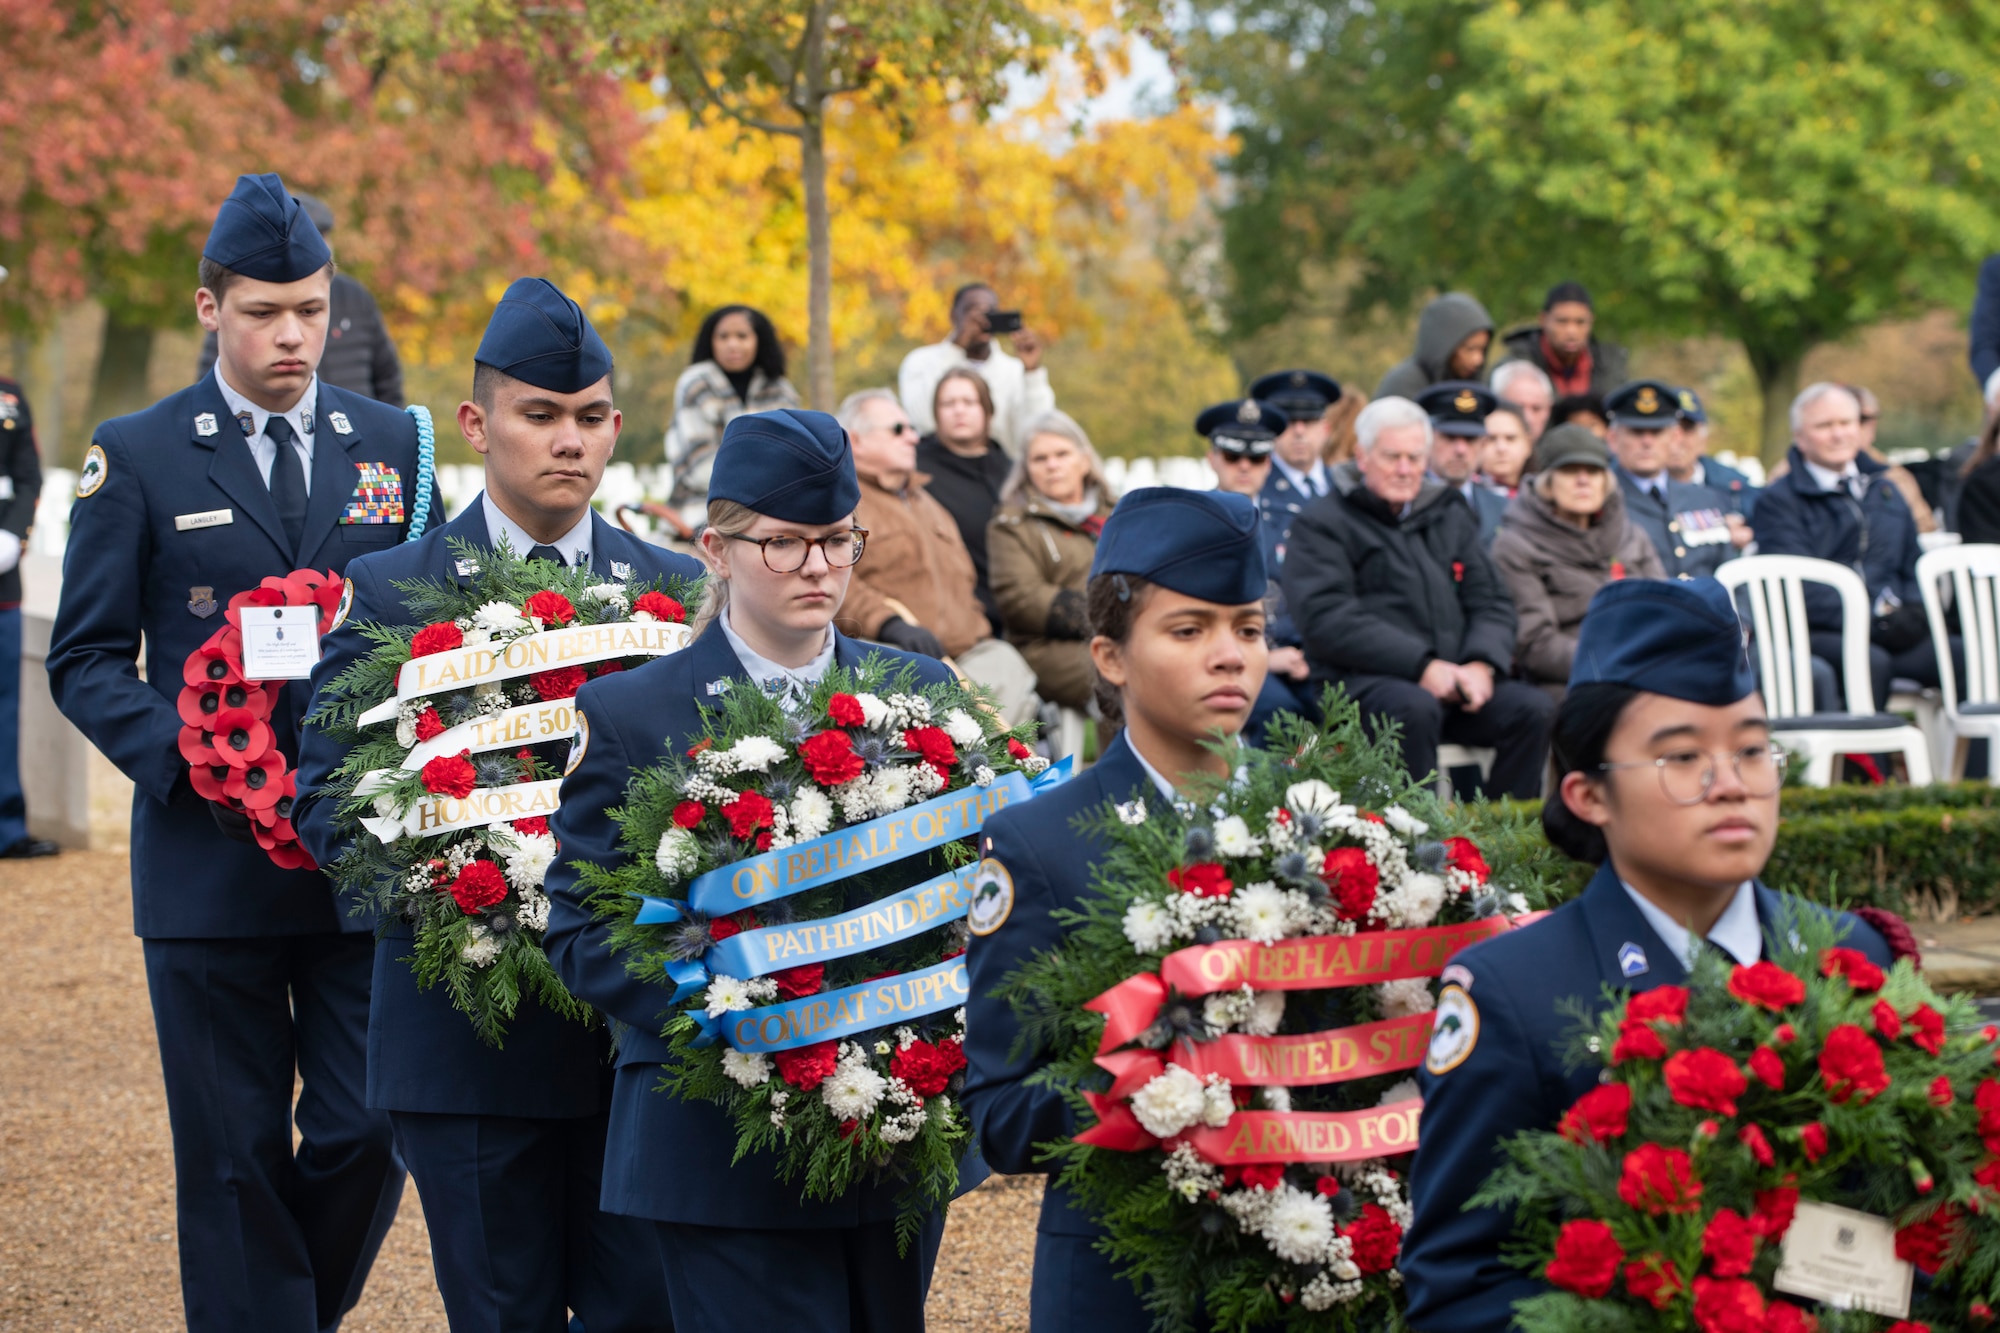 Members of the Alconbury Middle High School Junior Reserve Officer Training Corp carry wreaths at the Cambridge American Cemetery and Memorial, England